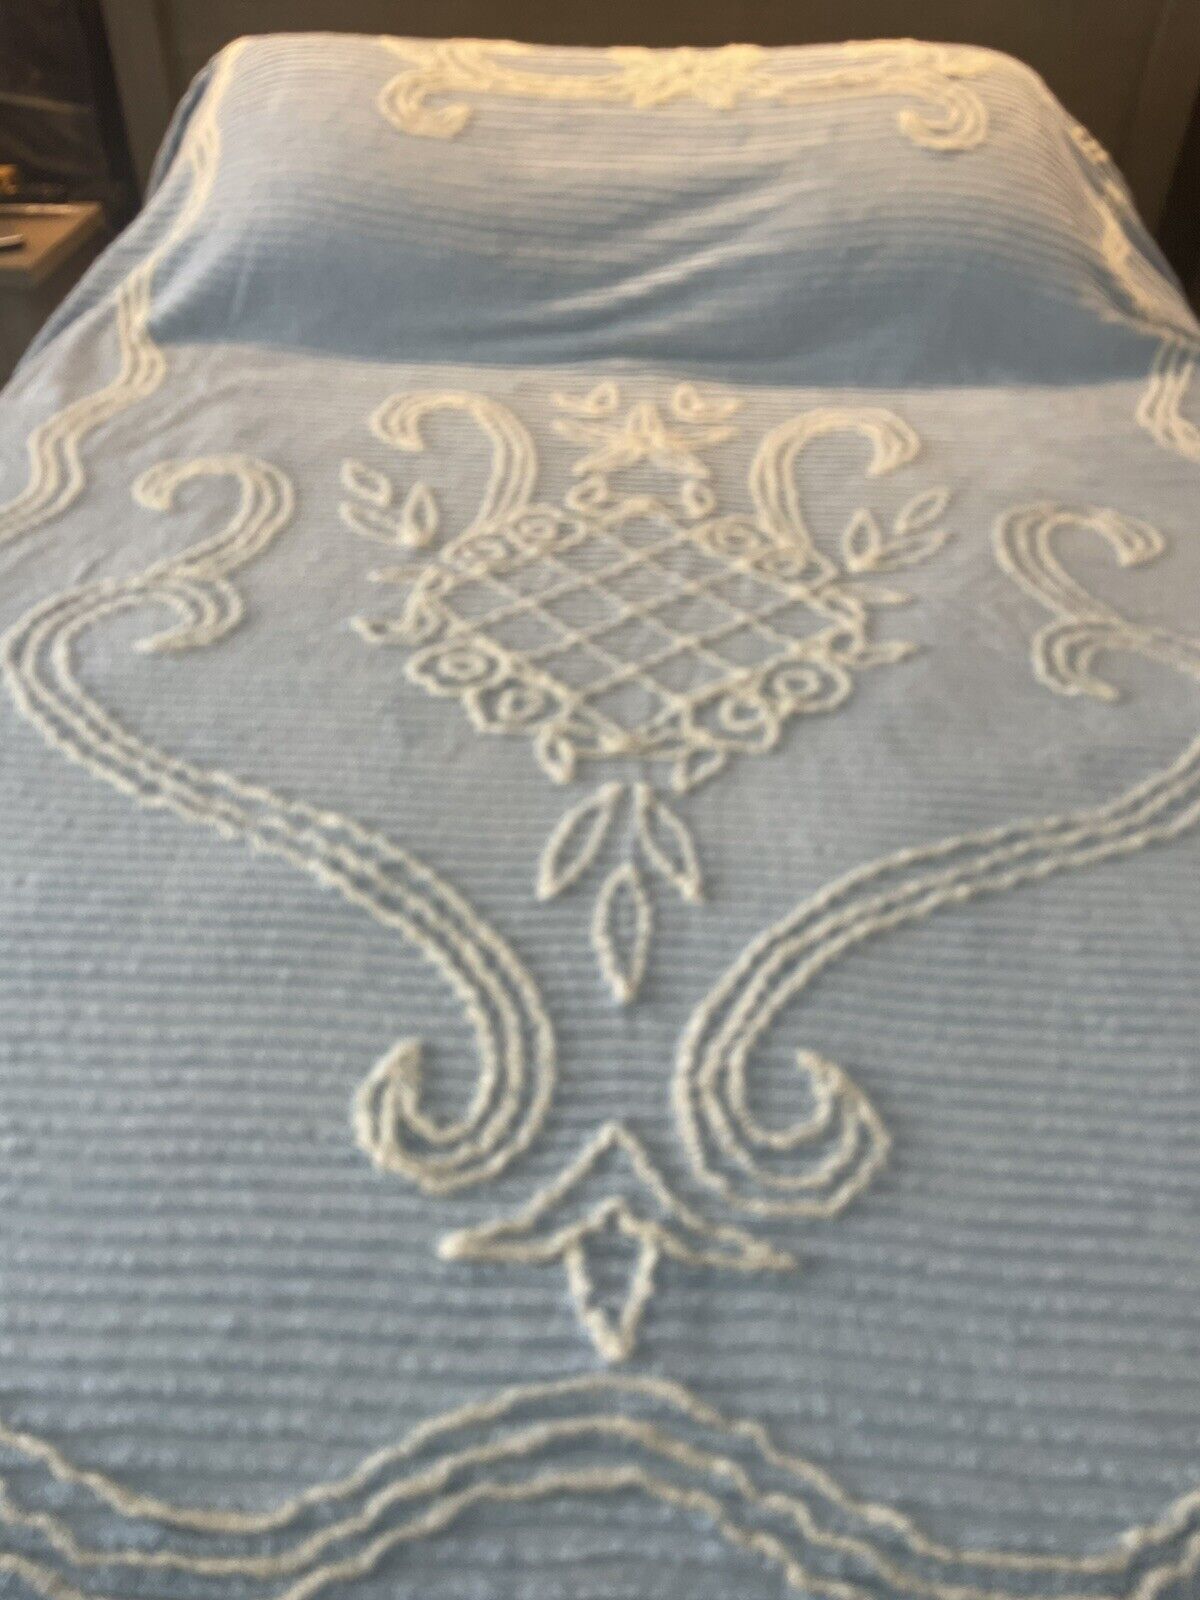 Vintage Blue White Floral Chenille Bedspread 87x100 Full Queen Grannycore READ